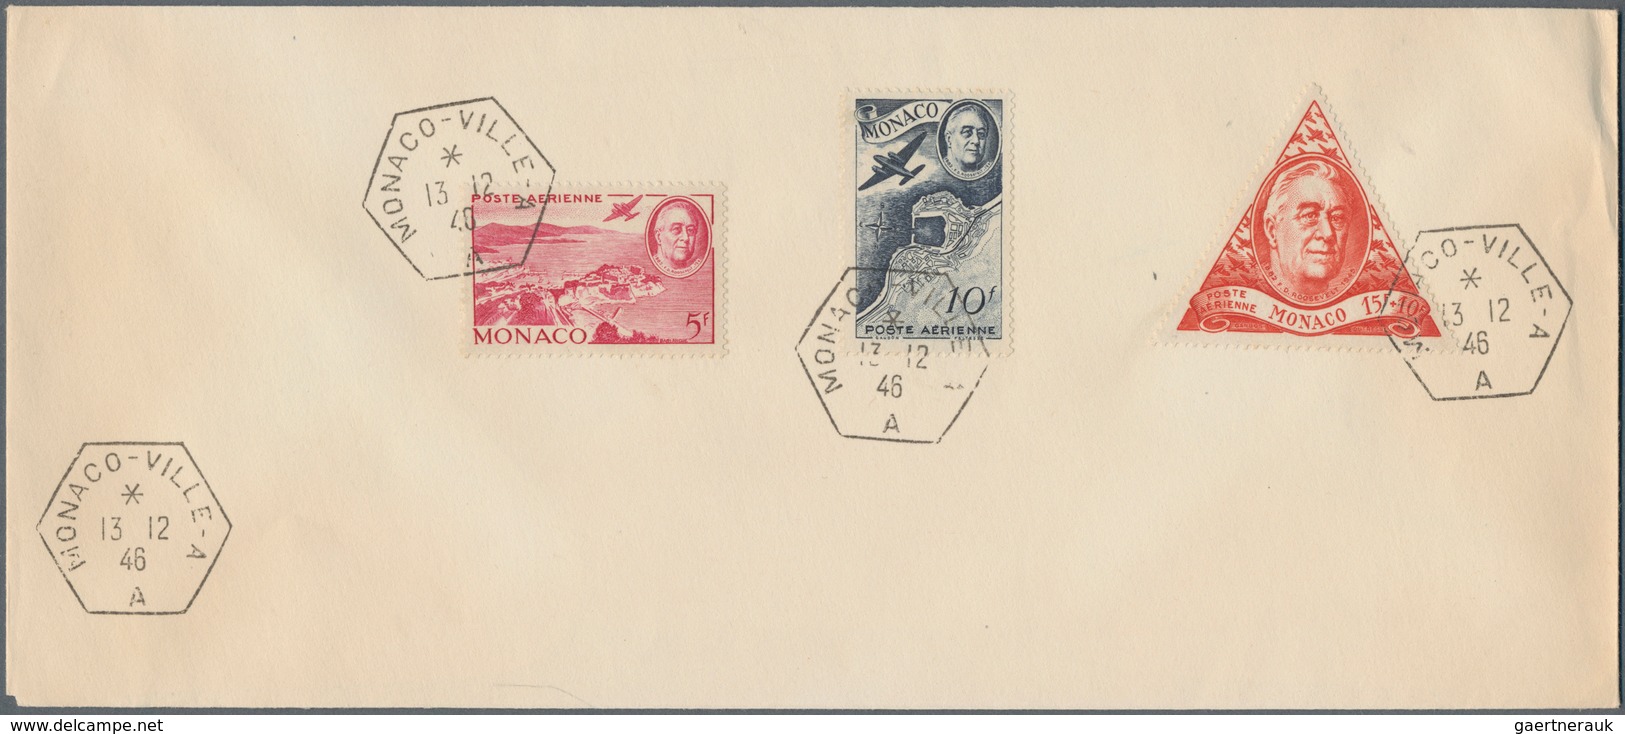 Monaco: 1946/1947, Death Anniversary of President Roosevelt/New York Stamp Exhibition, two complete